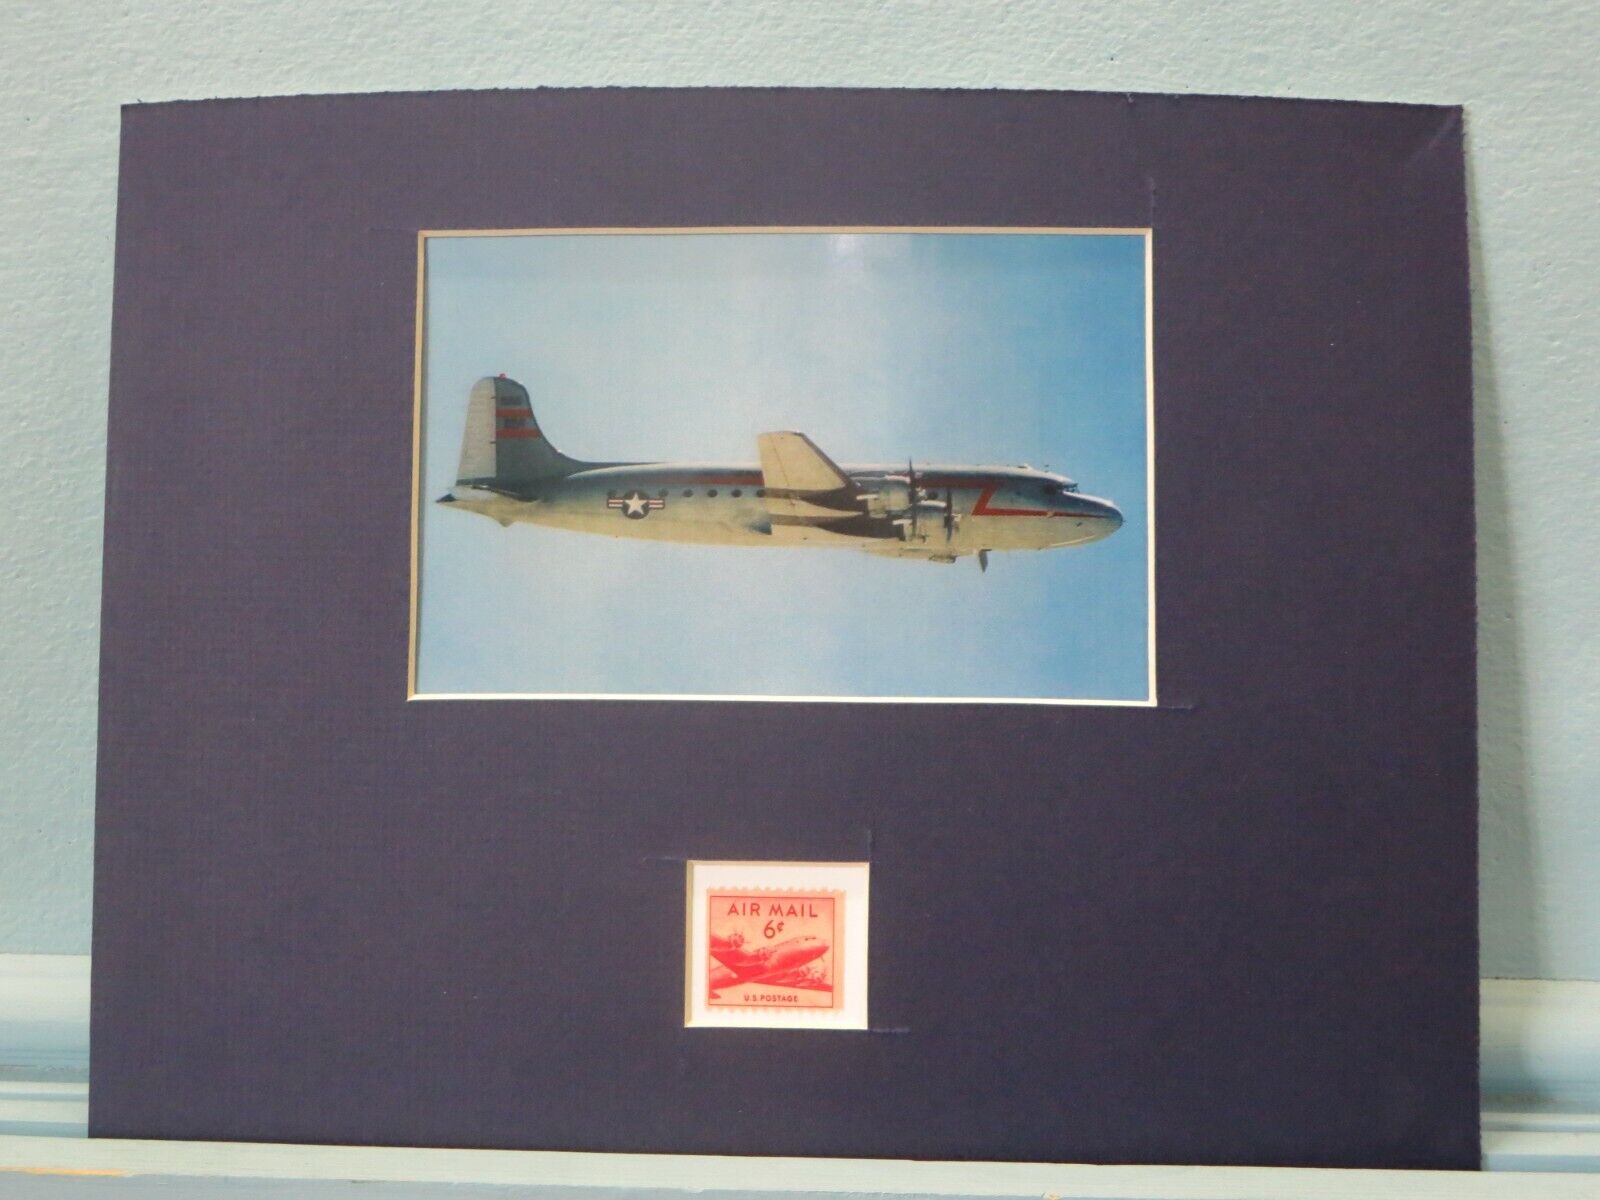 The Douglas C-54 Skymaster honored by its own stamp